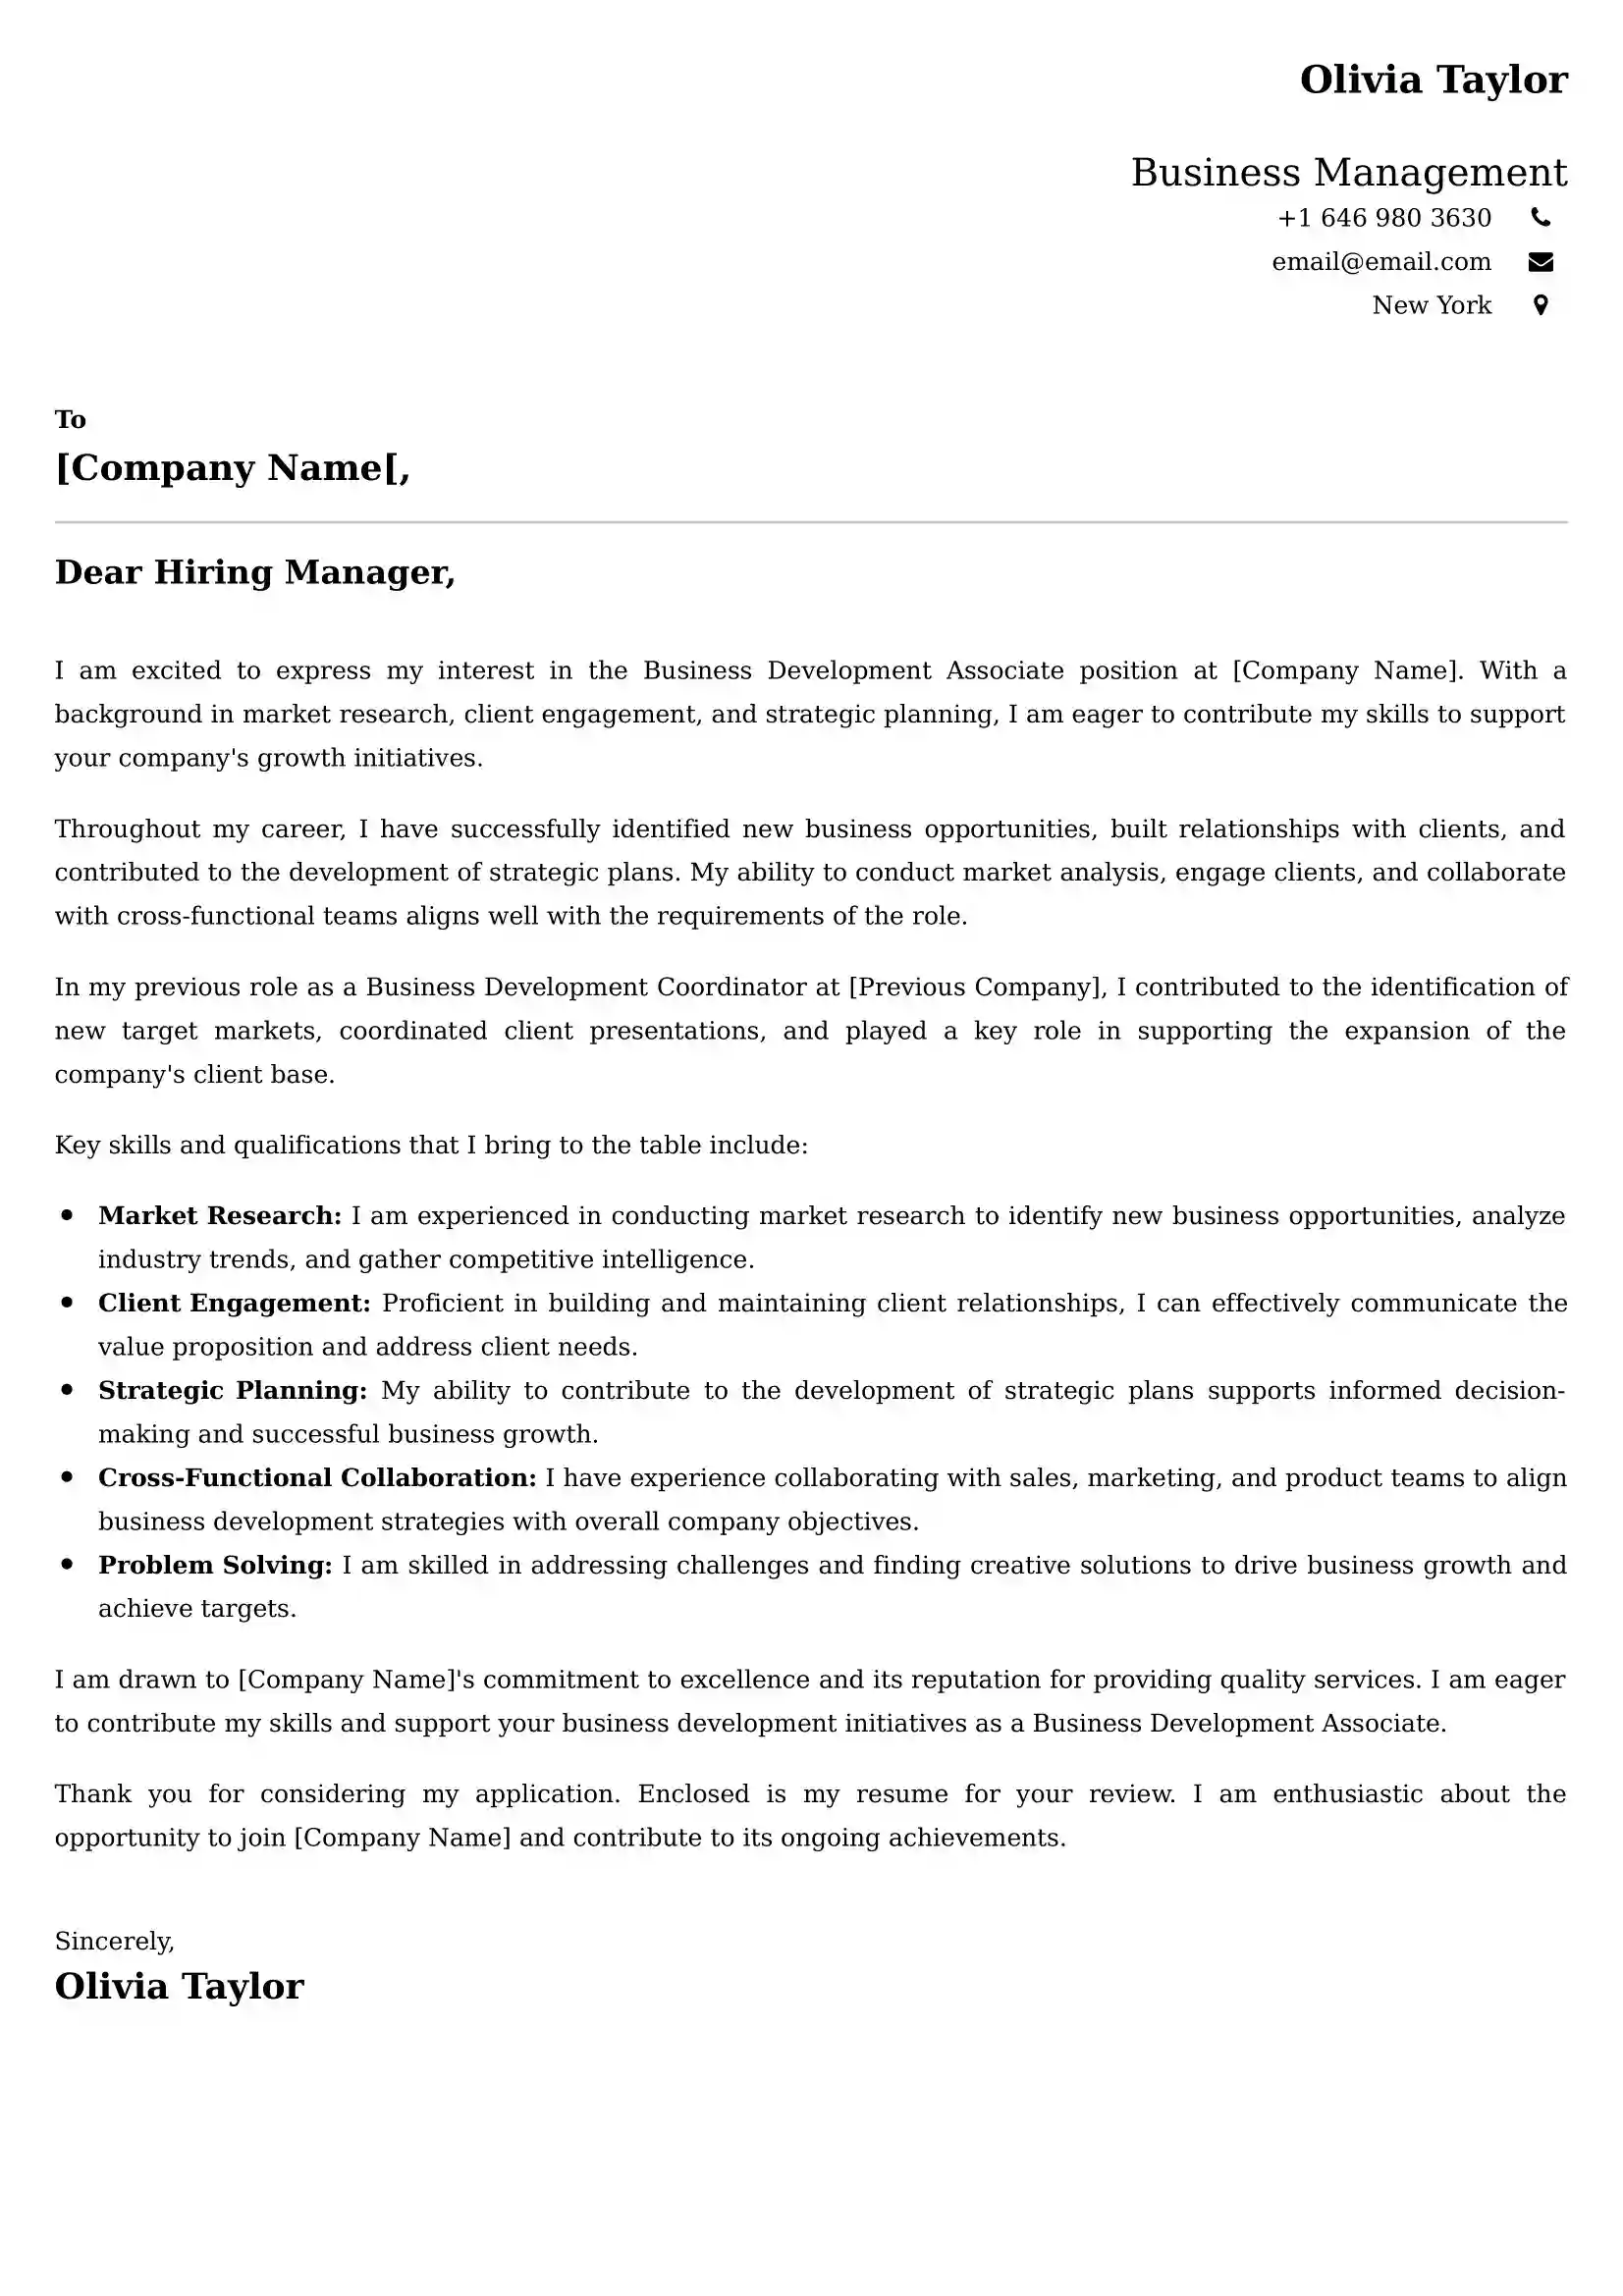 Business Management Cover Letter Examples UK - Tips and Guide